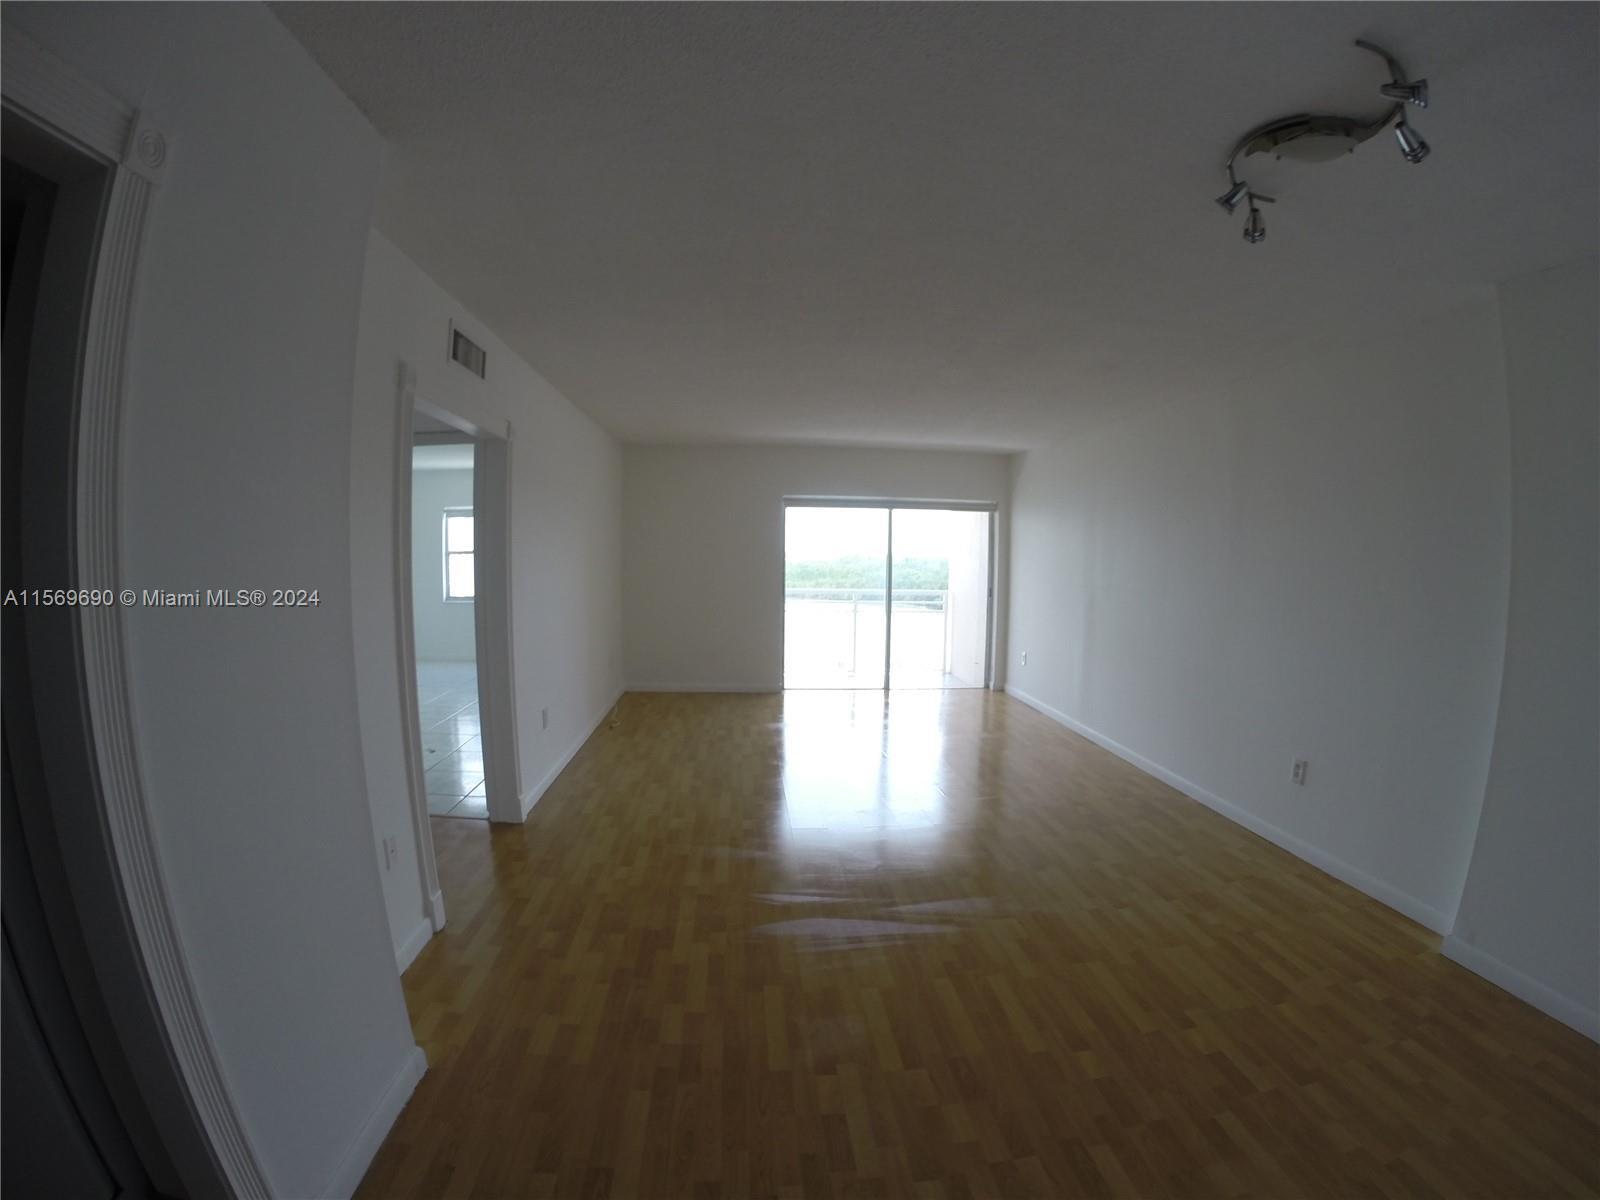 Prime location in Sunny Isles Beach, this beautiful, spacious, newly updated apartment is within wal